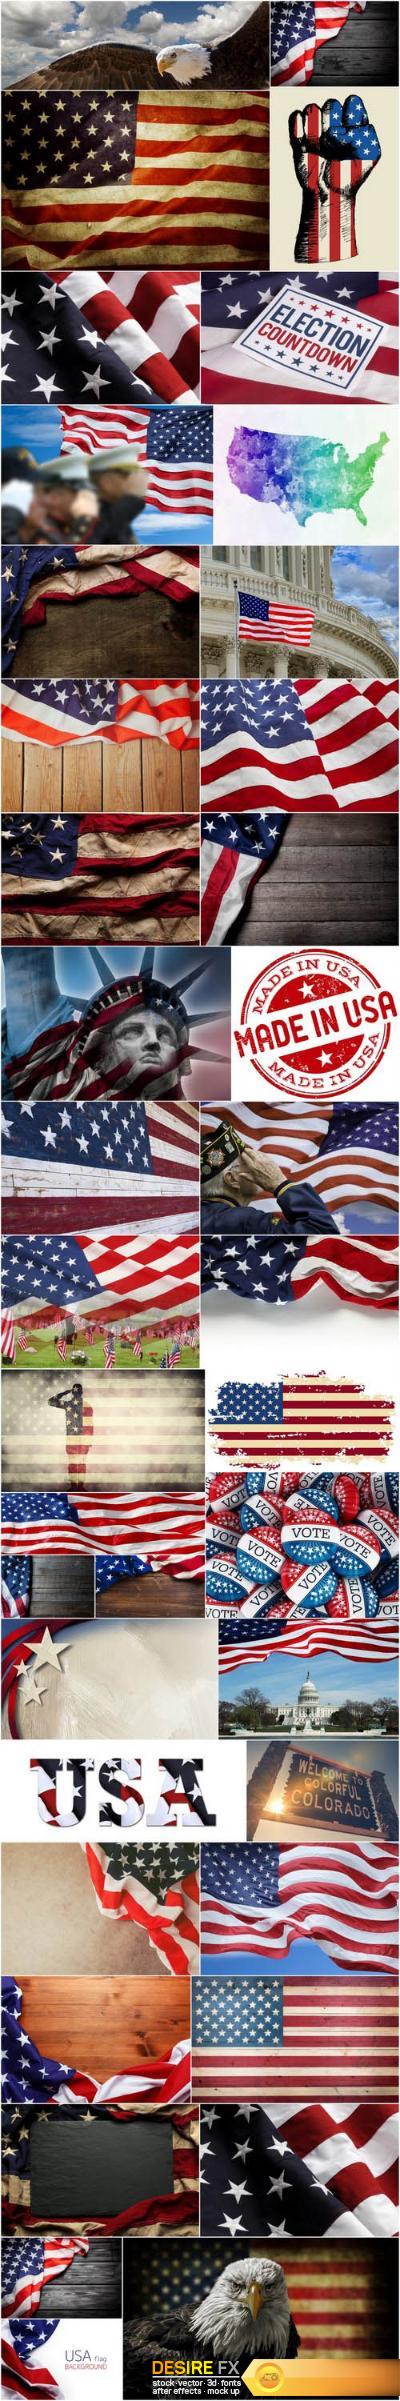 U.S. Style – American Patriot, Set of 39xUHQ JPEG Professional Stock Images